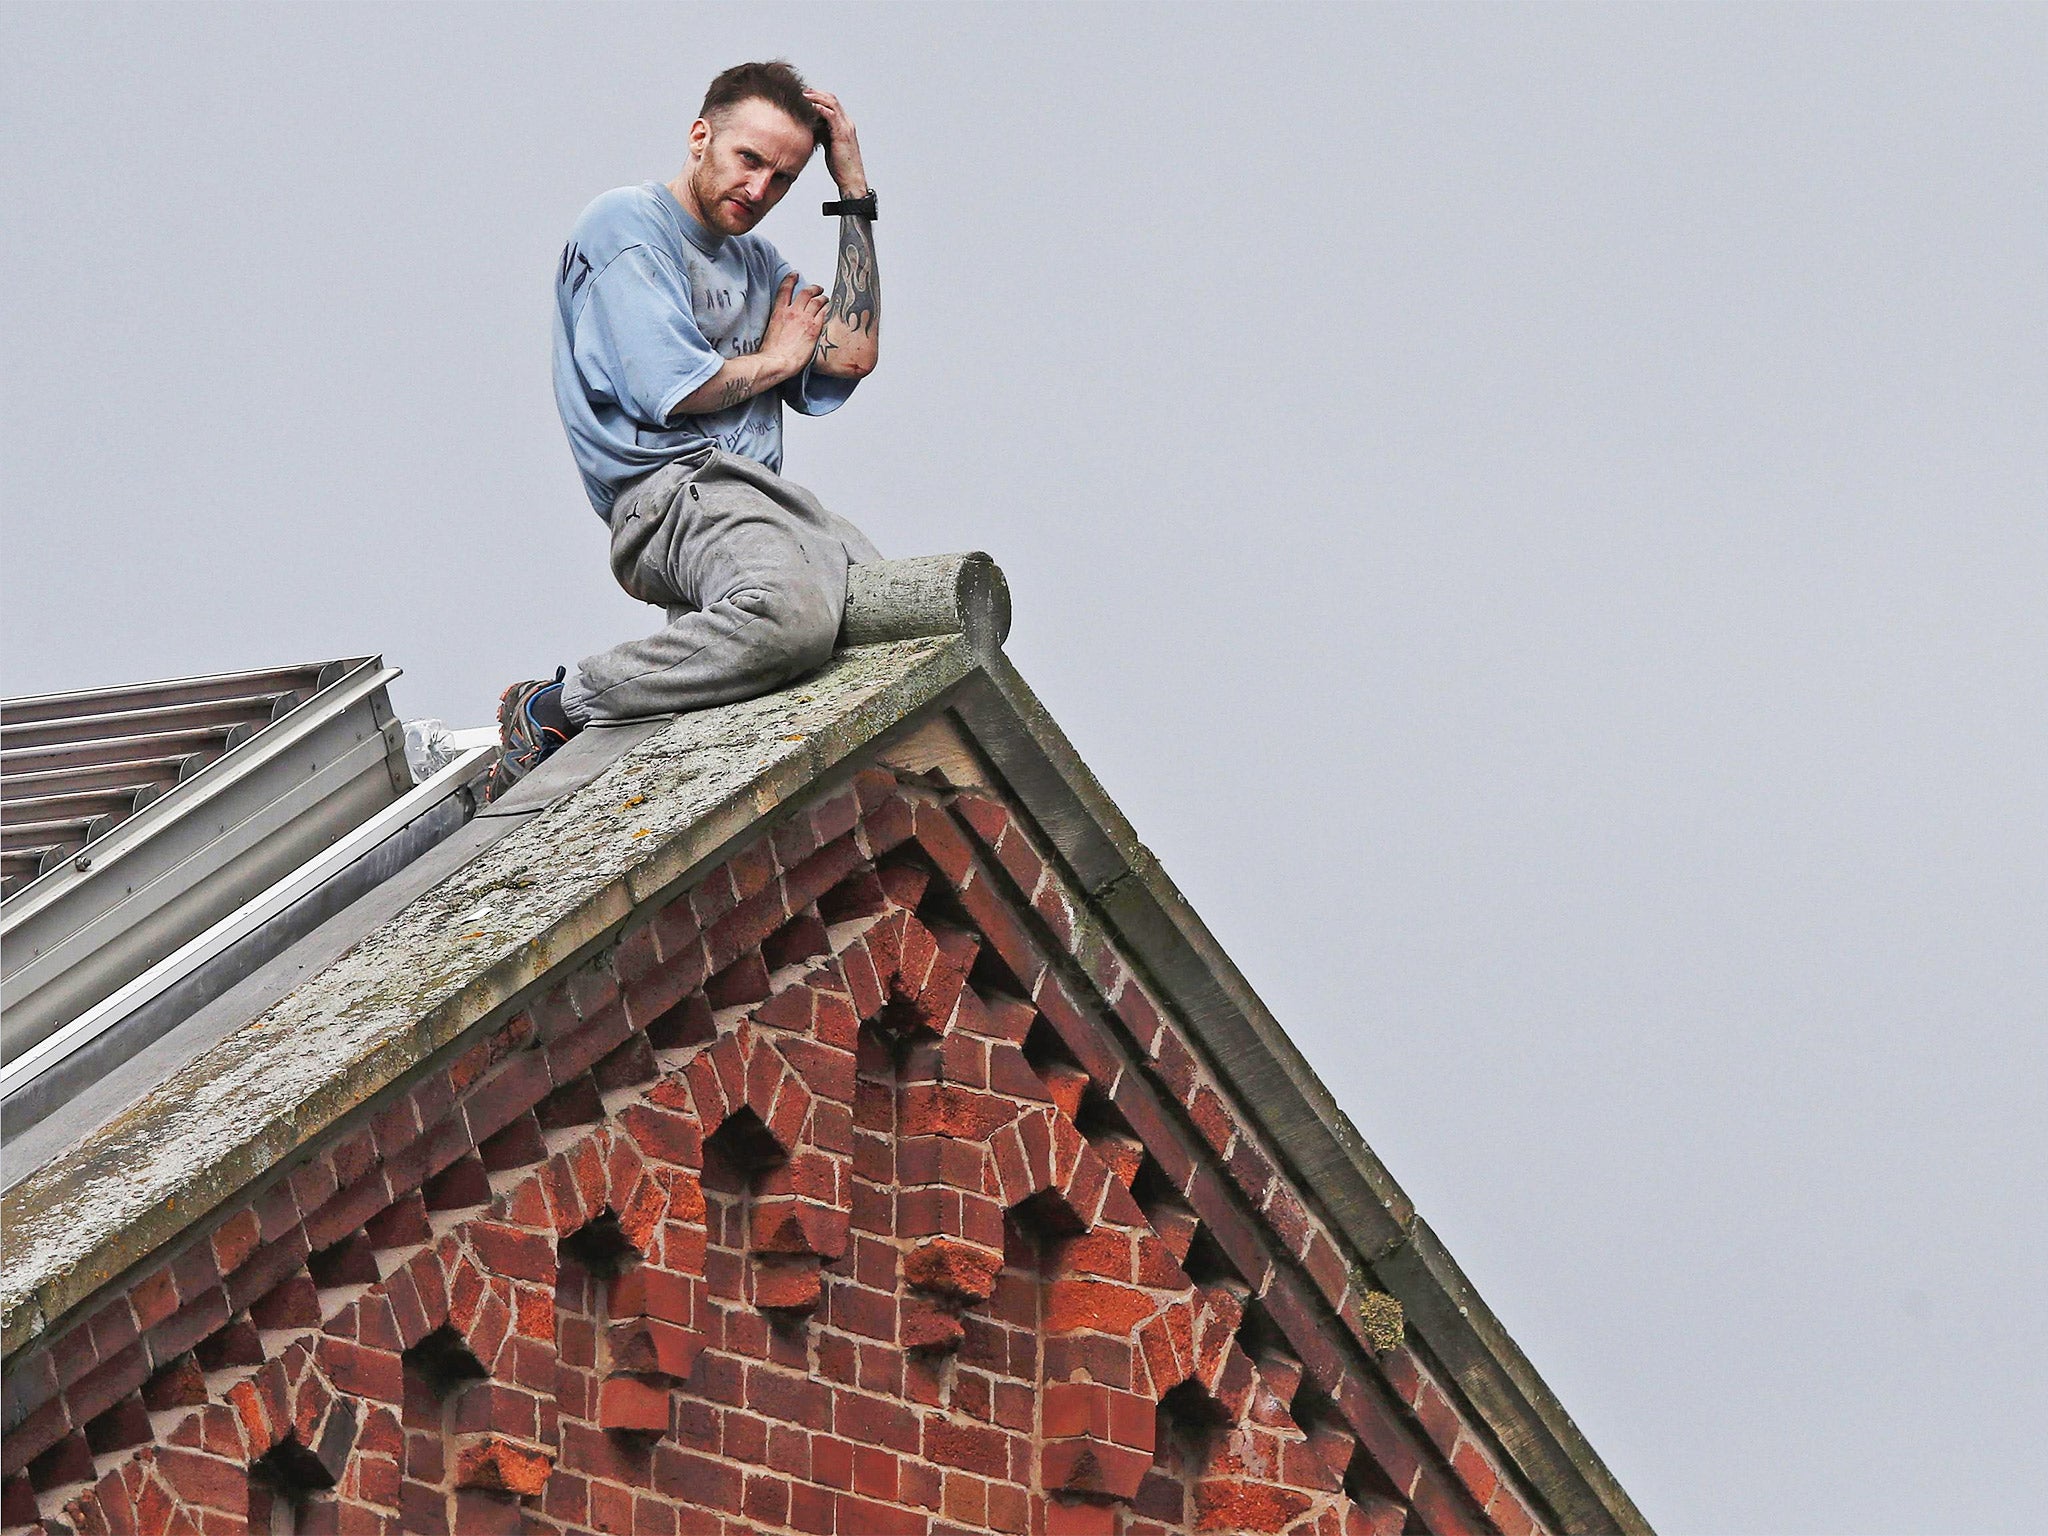 Convicted murderer Stuart Horner enters the third day of his rooftop protest at Strangeways prison in Manchester